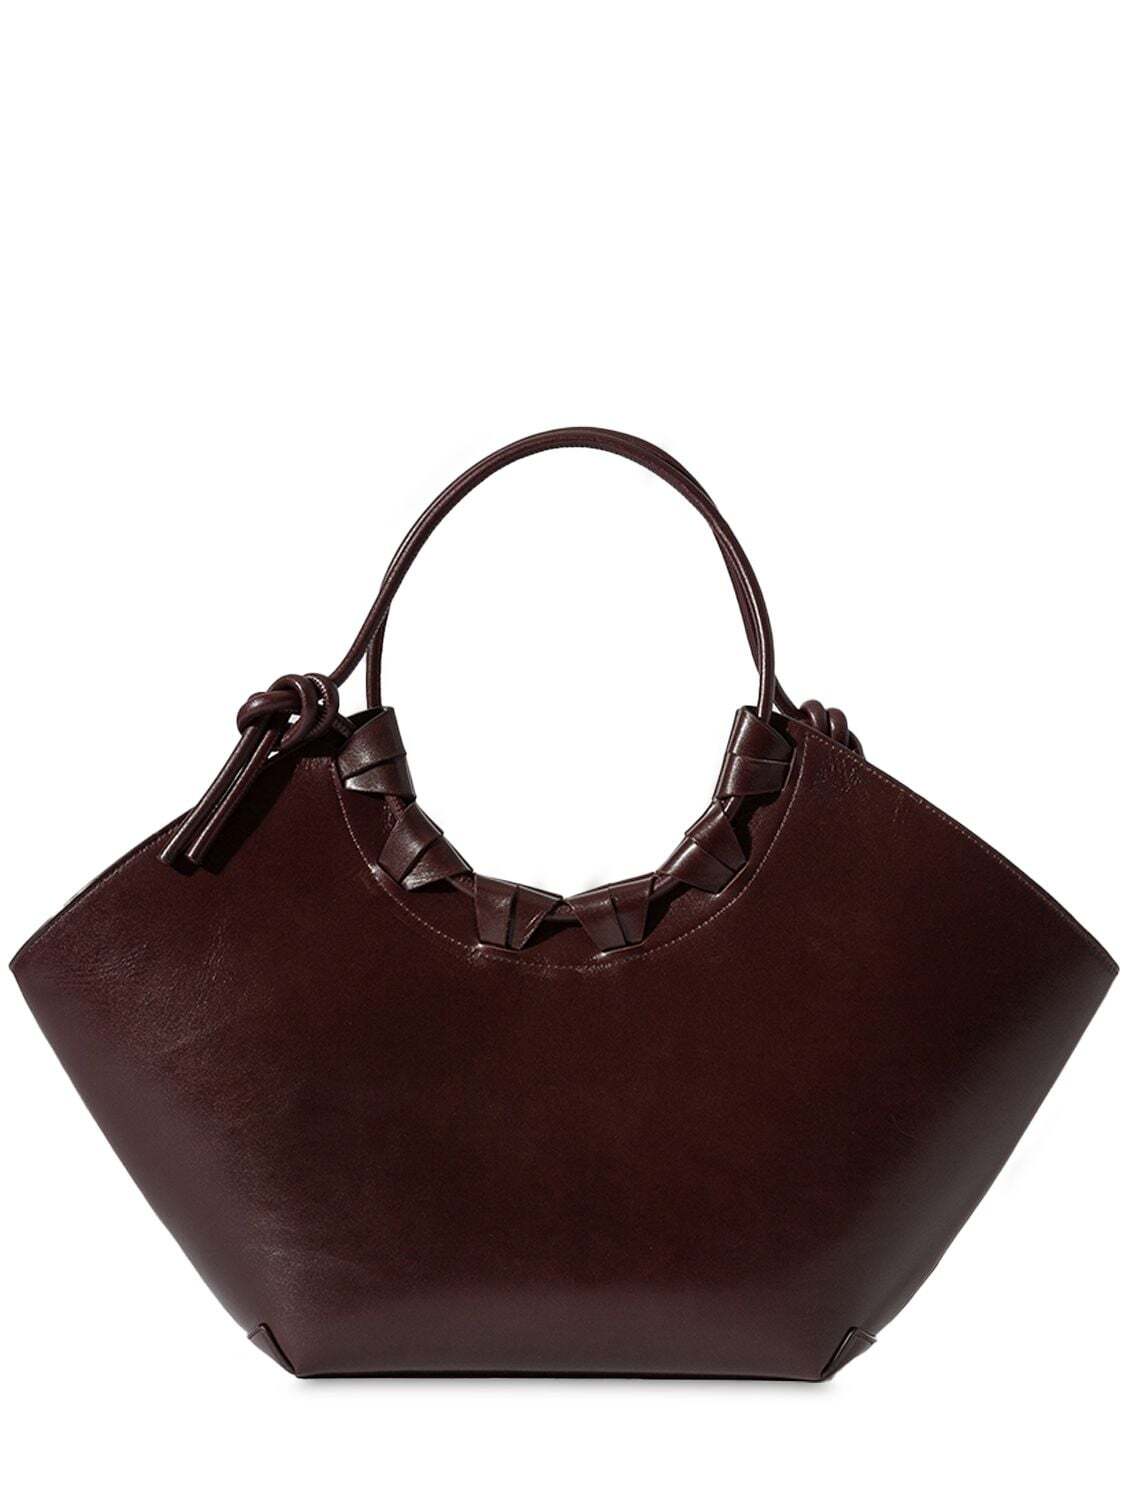 HEREU Cordell Leather Tote Bag in brown